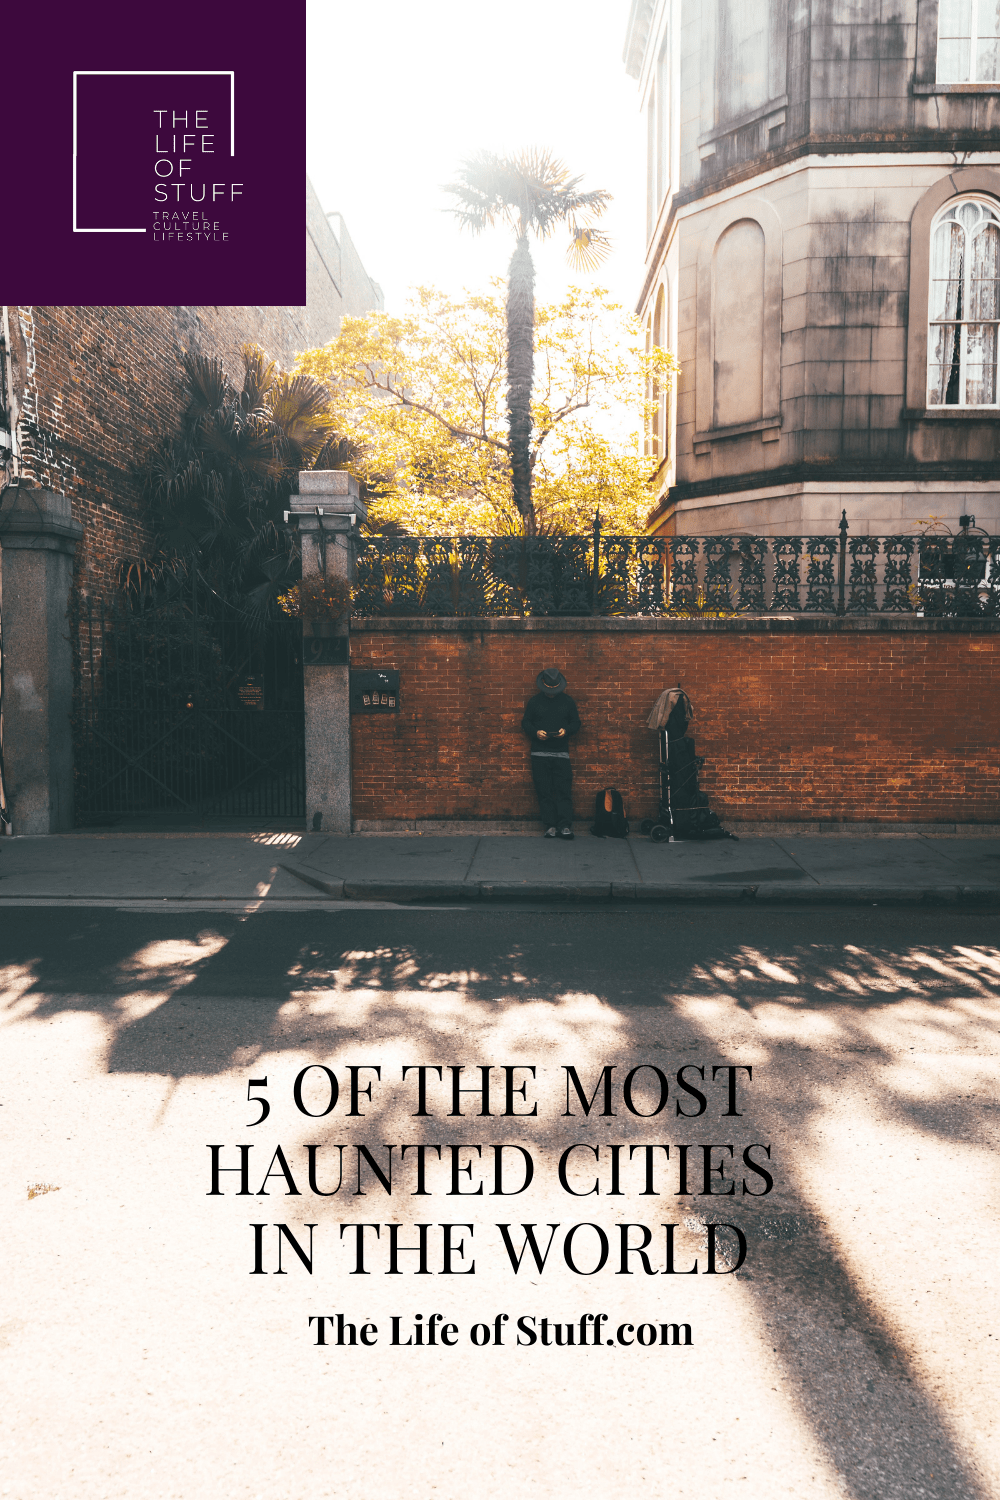 Halloween Special - Most Haunted Cities in the World - The Life of Stuff